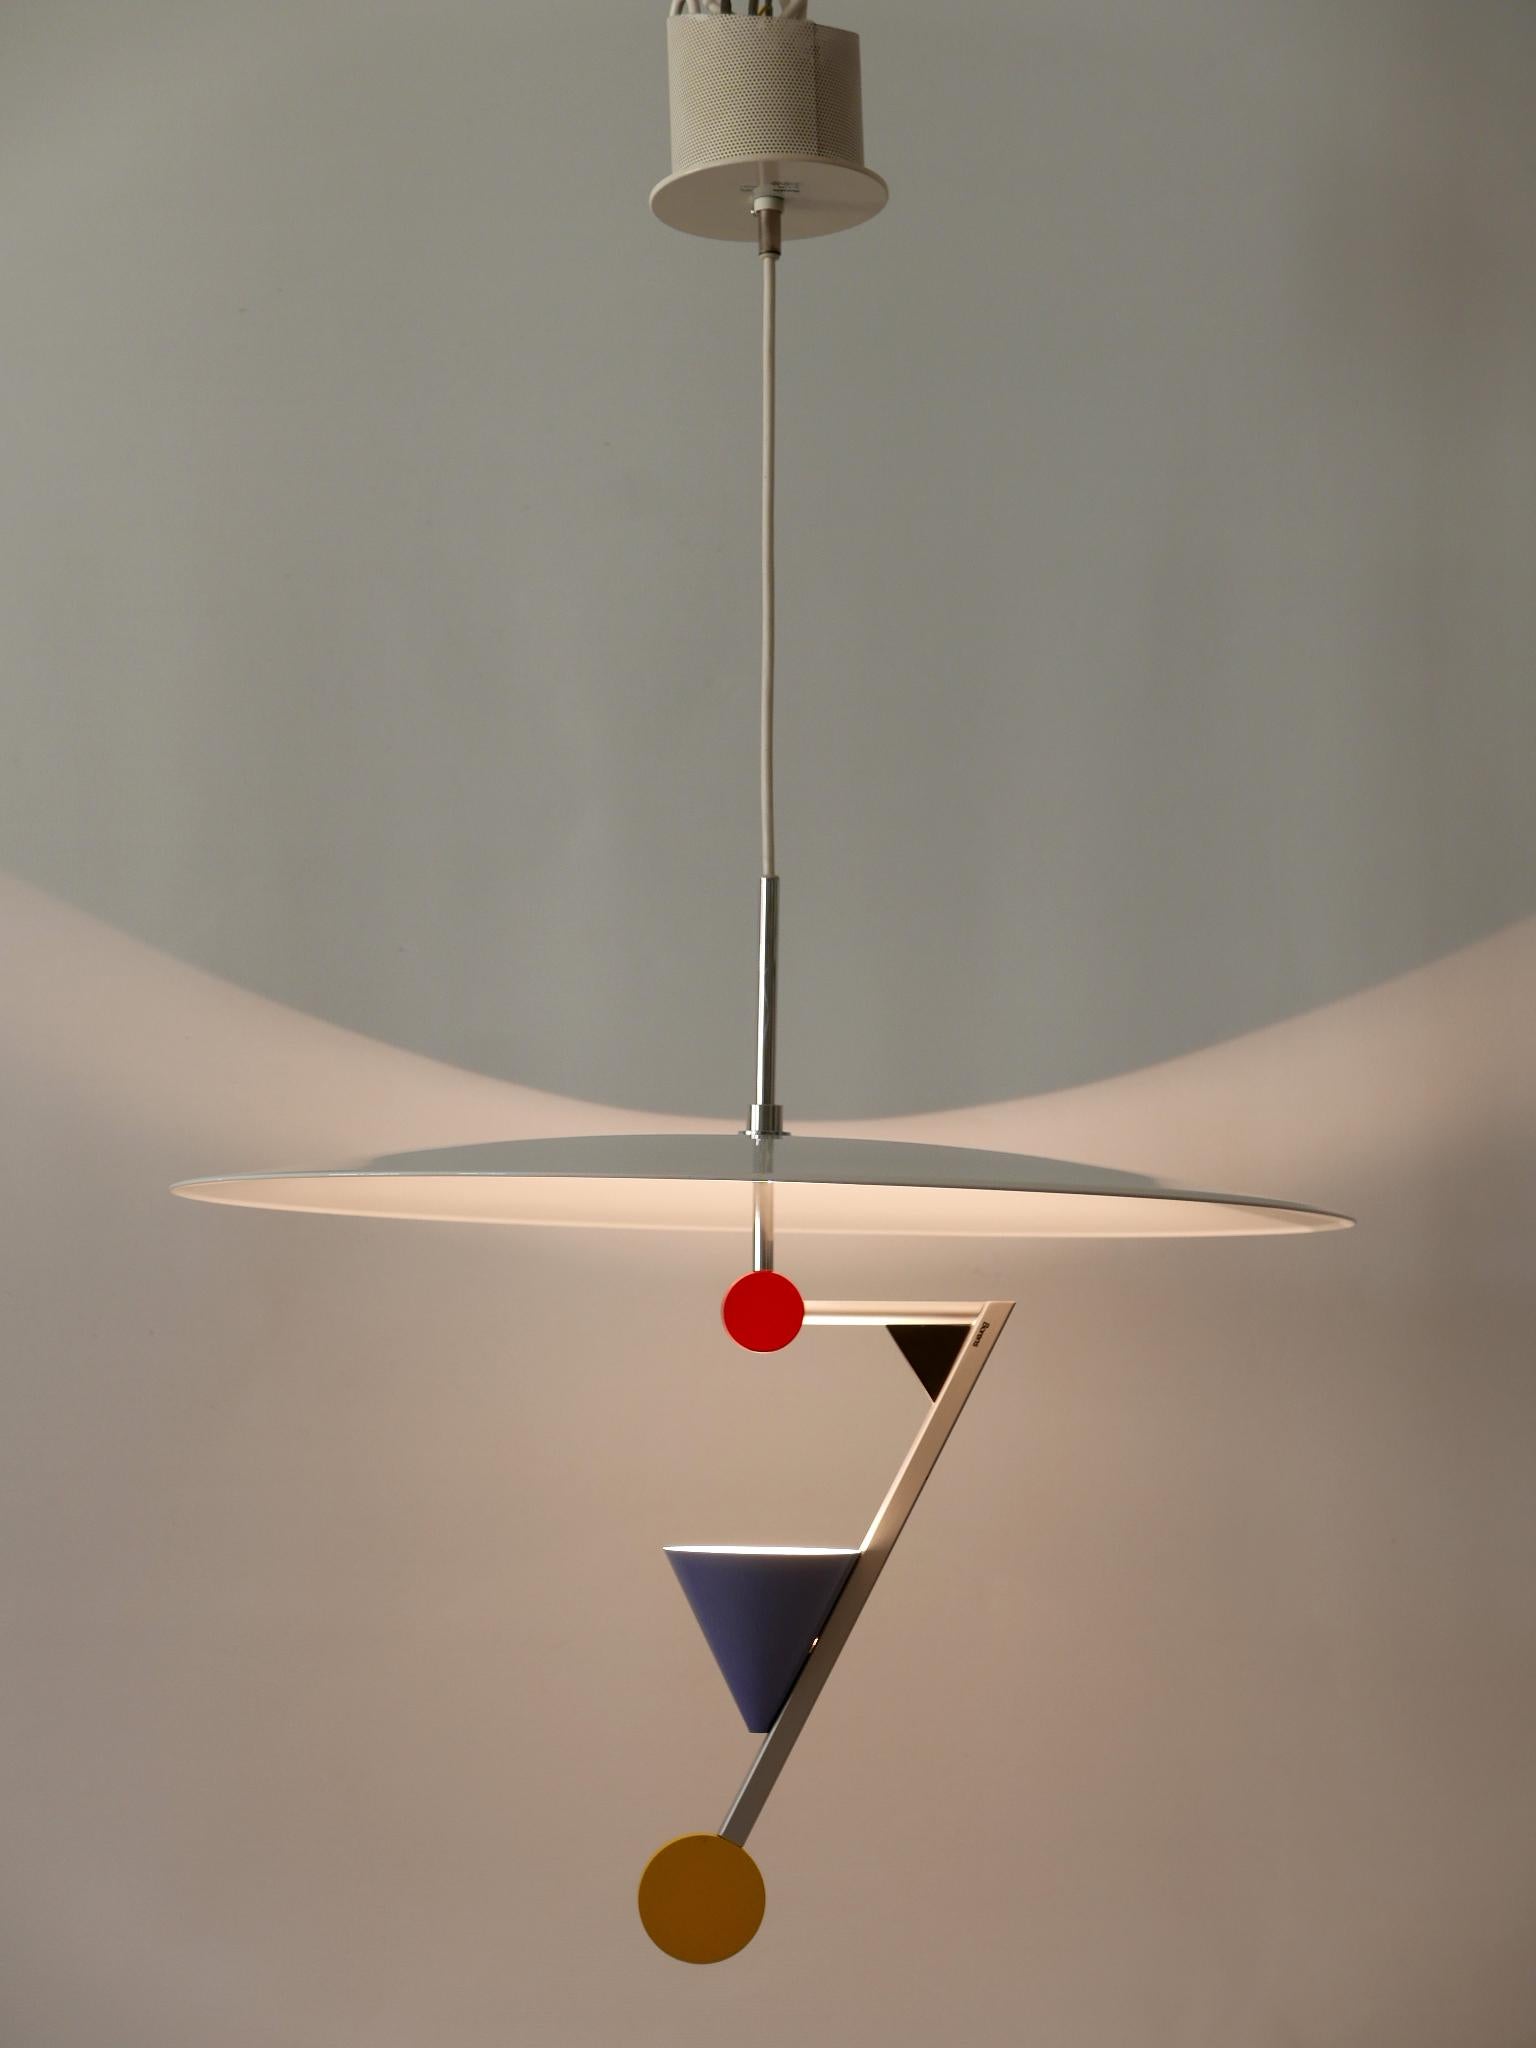 Incroyables lampes suspendues postmodernes Halo There d'Olle Andersson pour Borens 1982 en vente 7